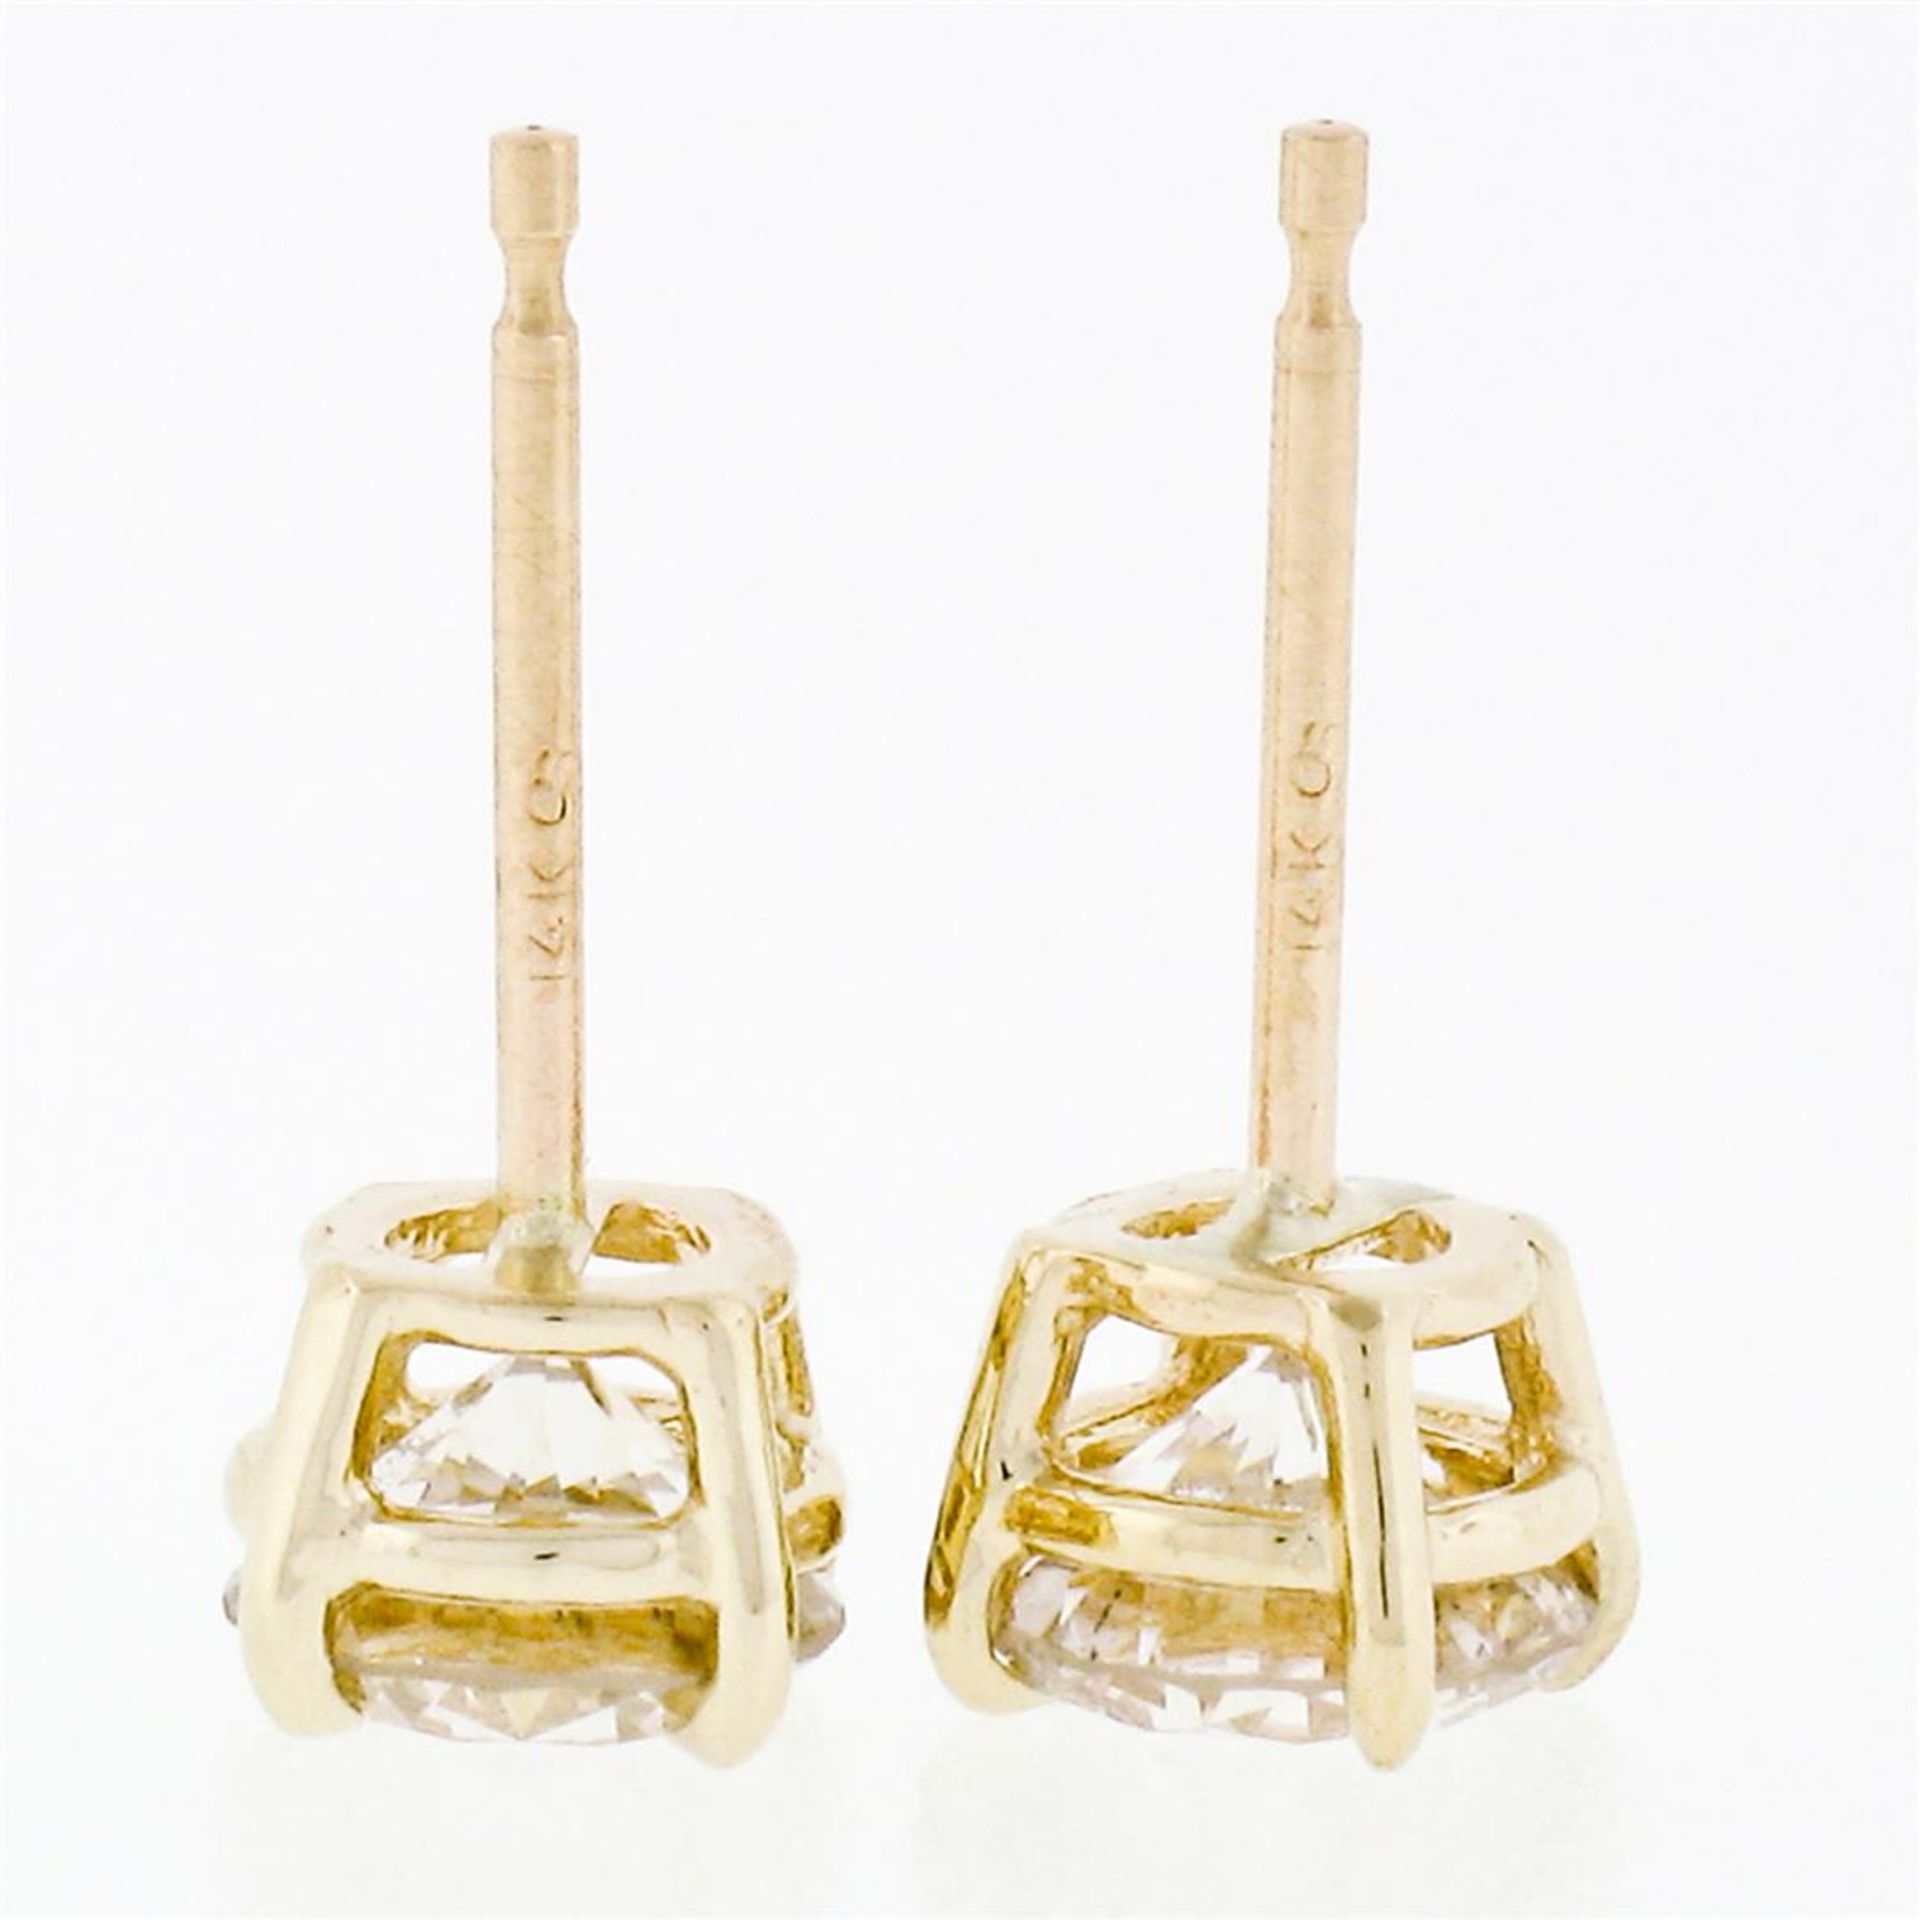 14k Yellow Gold 1.11ctw Round Brilliant Cut Diamond Claw Prong Stud Earrings - Image 6 of 6